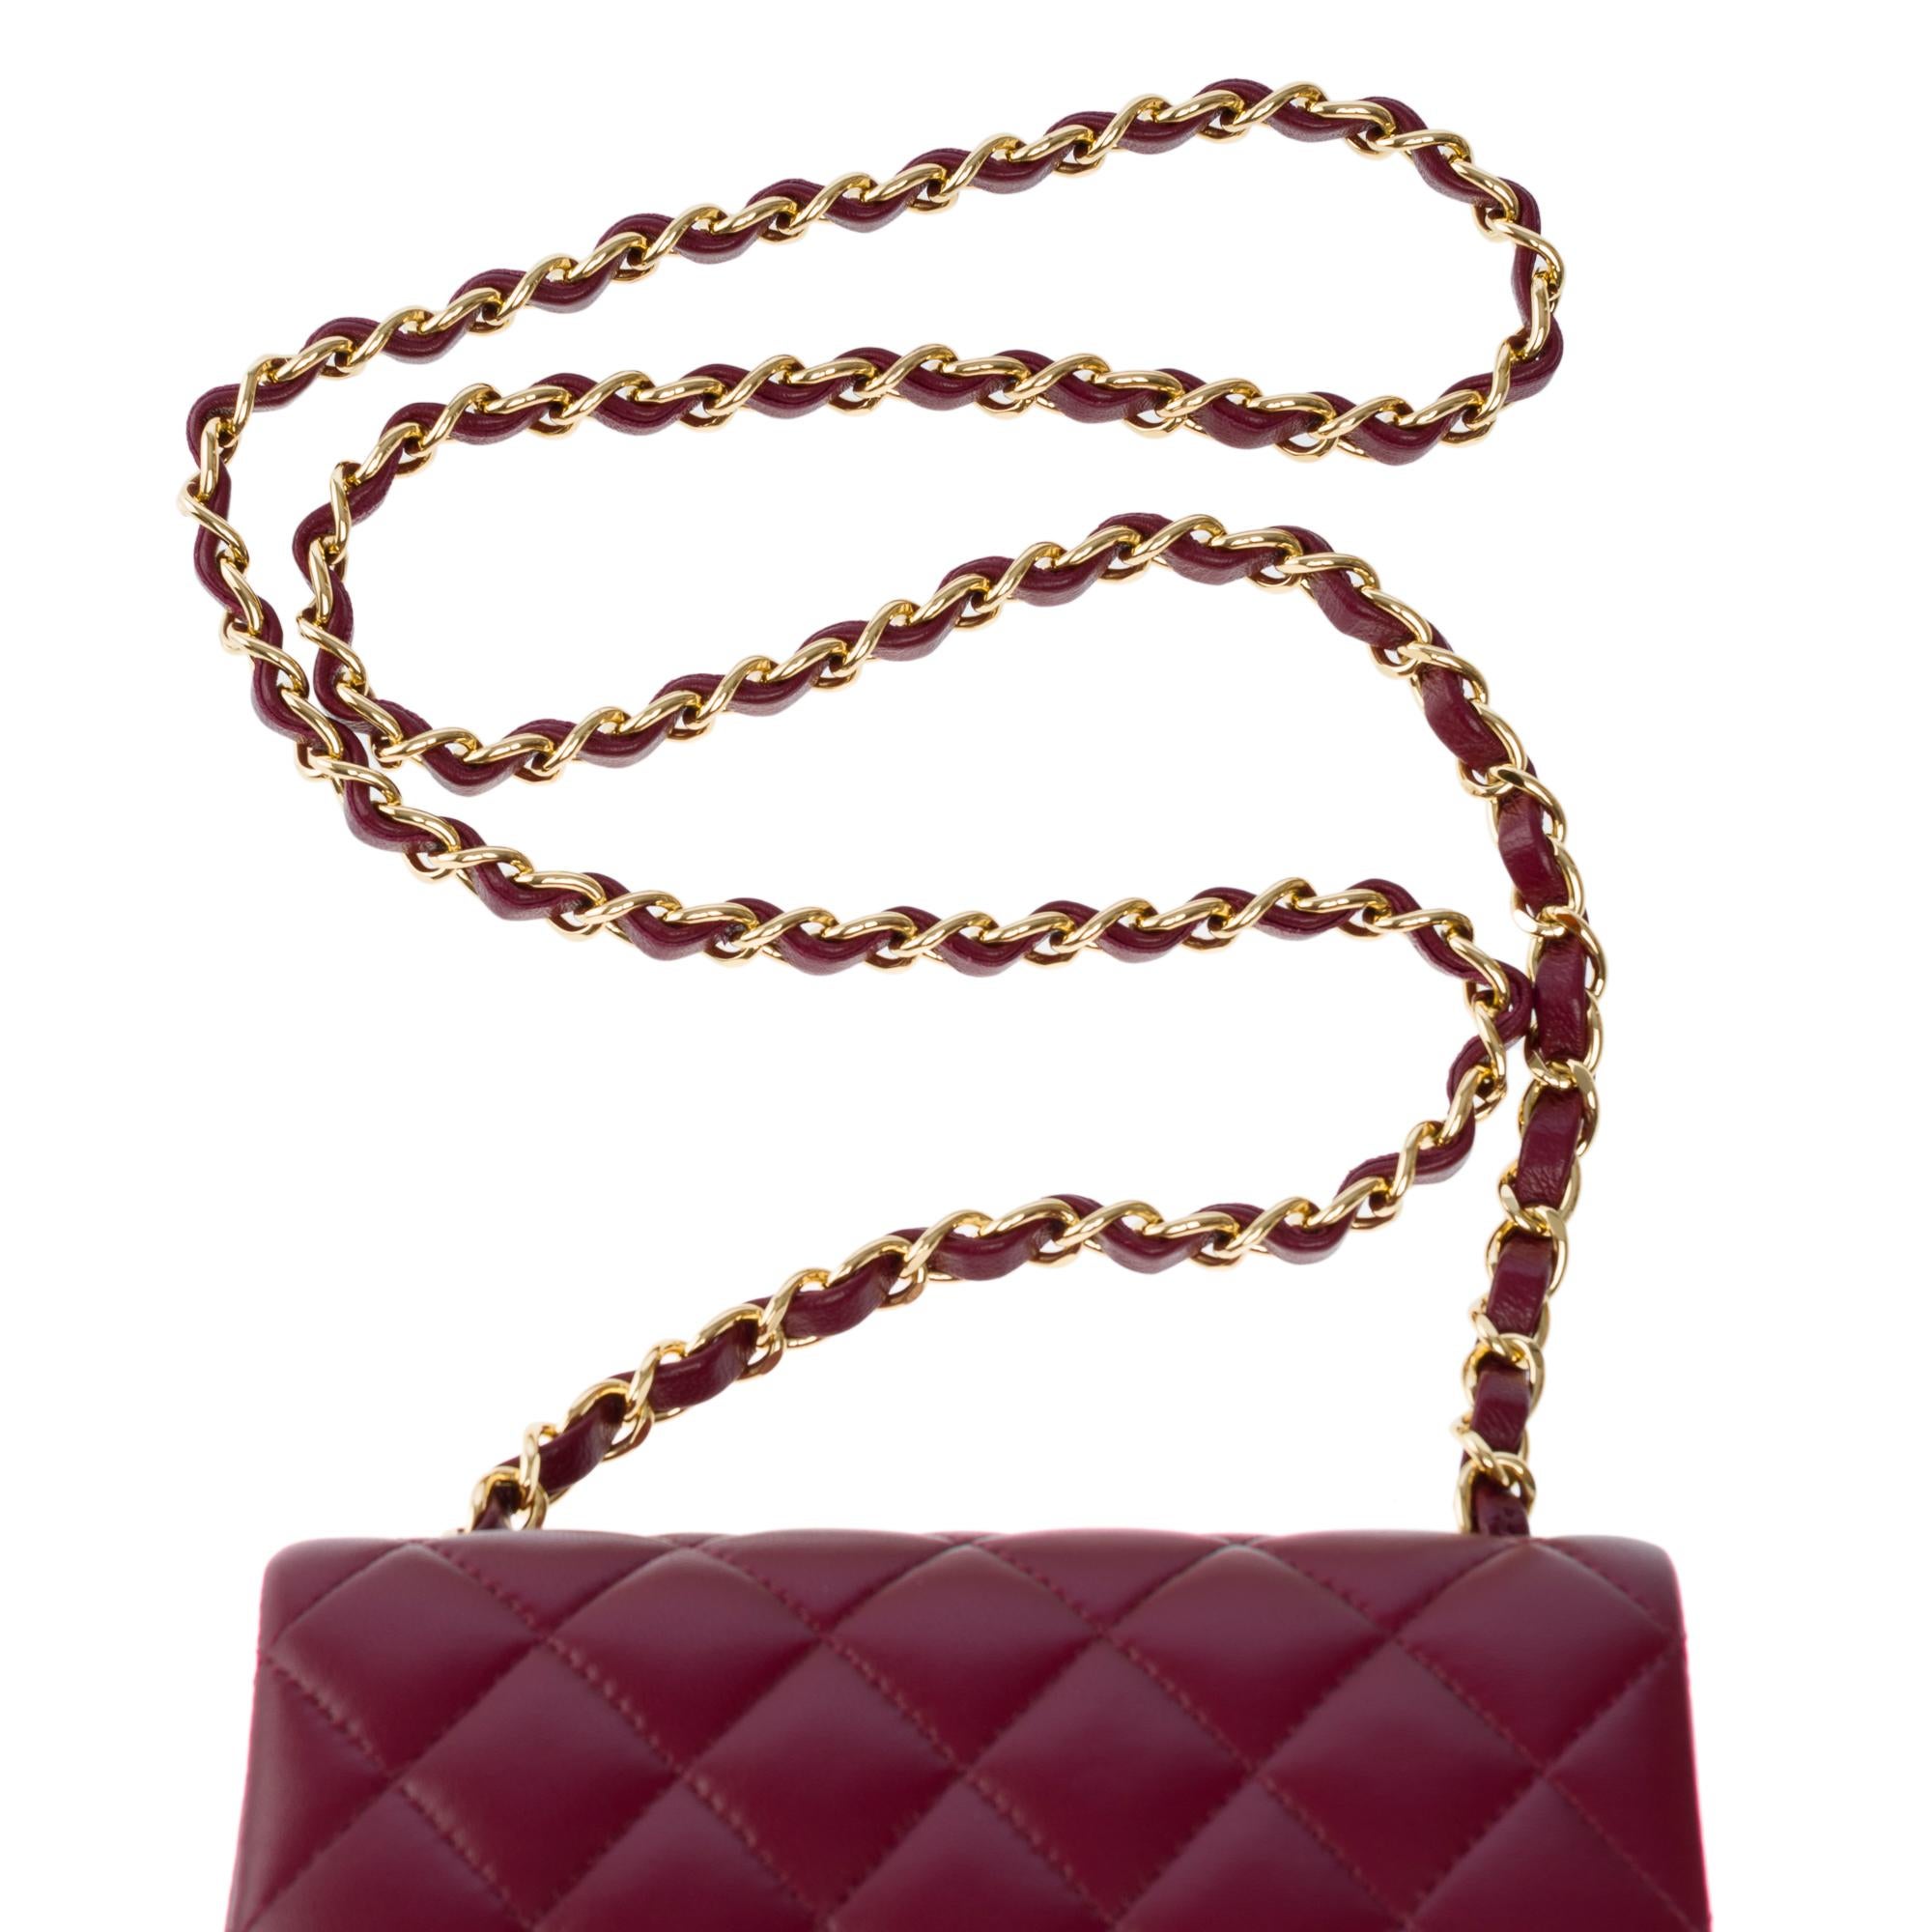 Gorgeous Chanel Mini Timeless Shoulder flap bag in Plum quilted leather, GHW For Sale 6